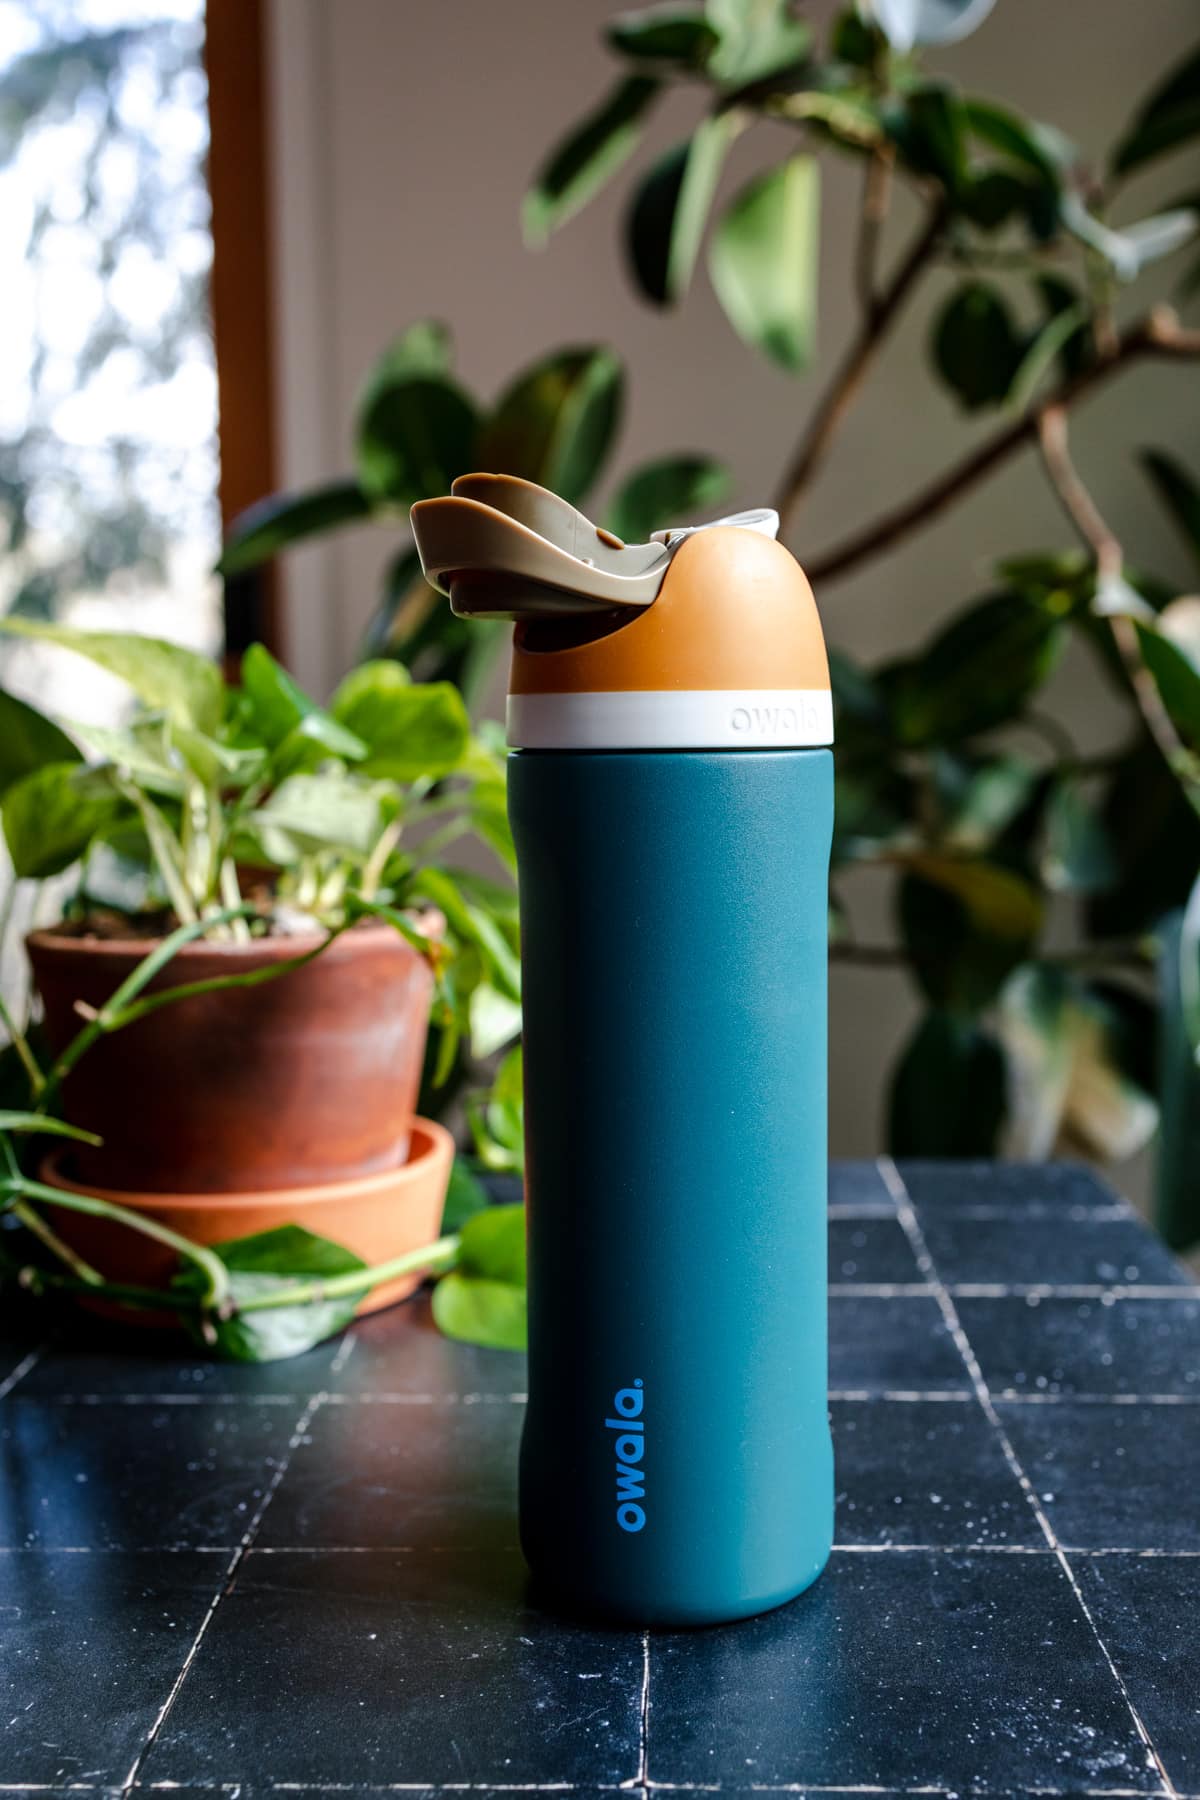 Teal Owala waterbottle that is opened sitting on a black tile surface.